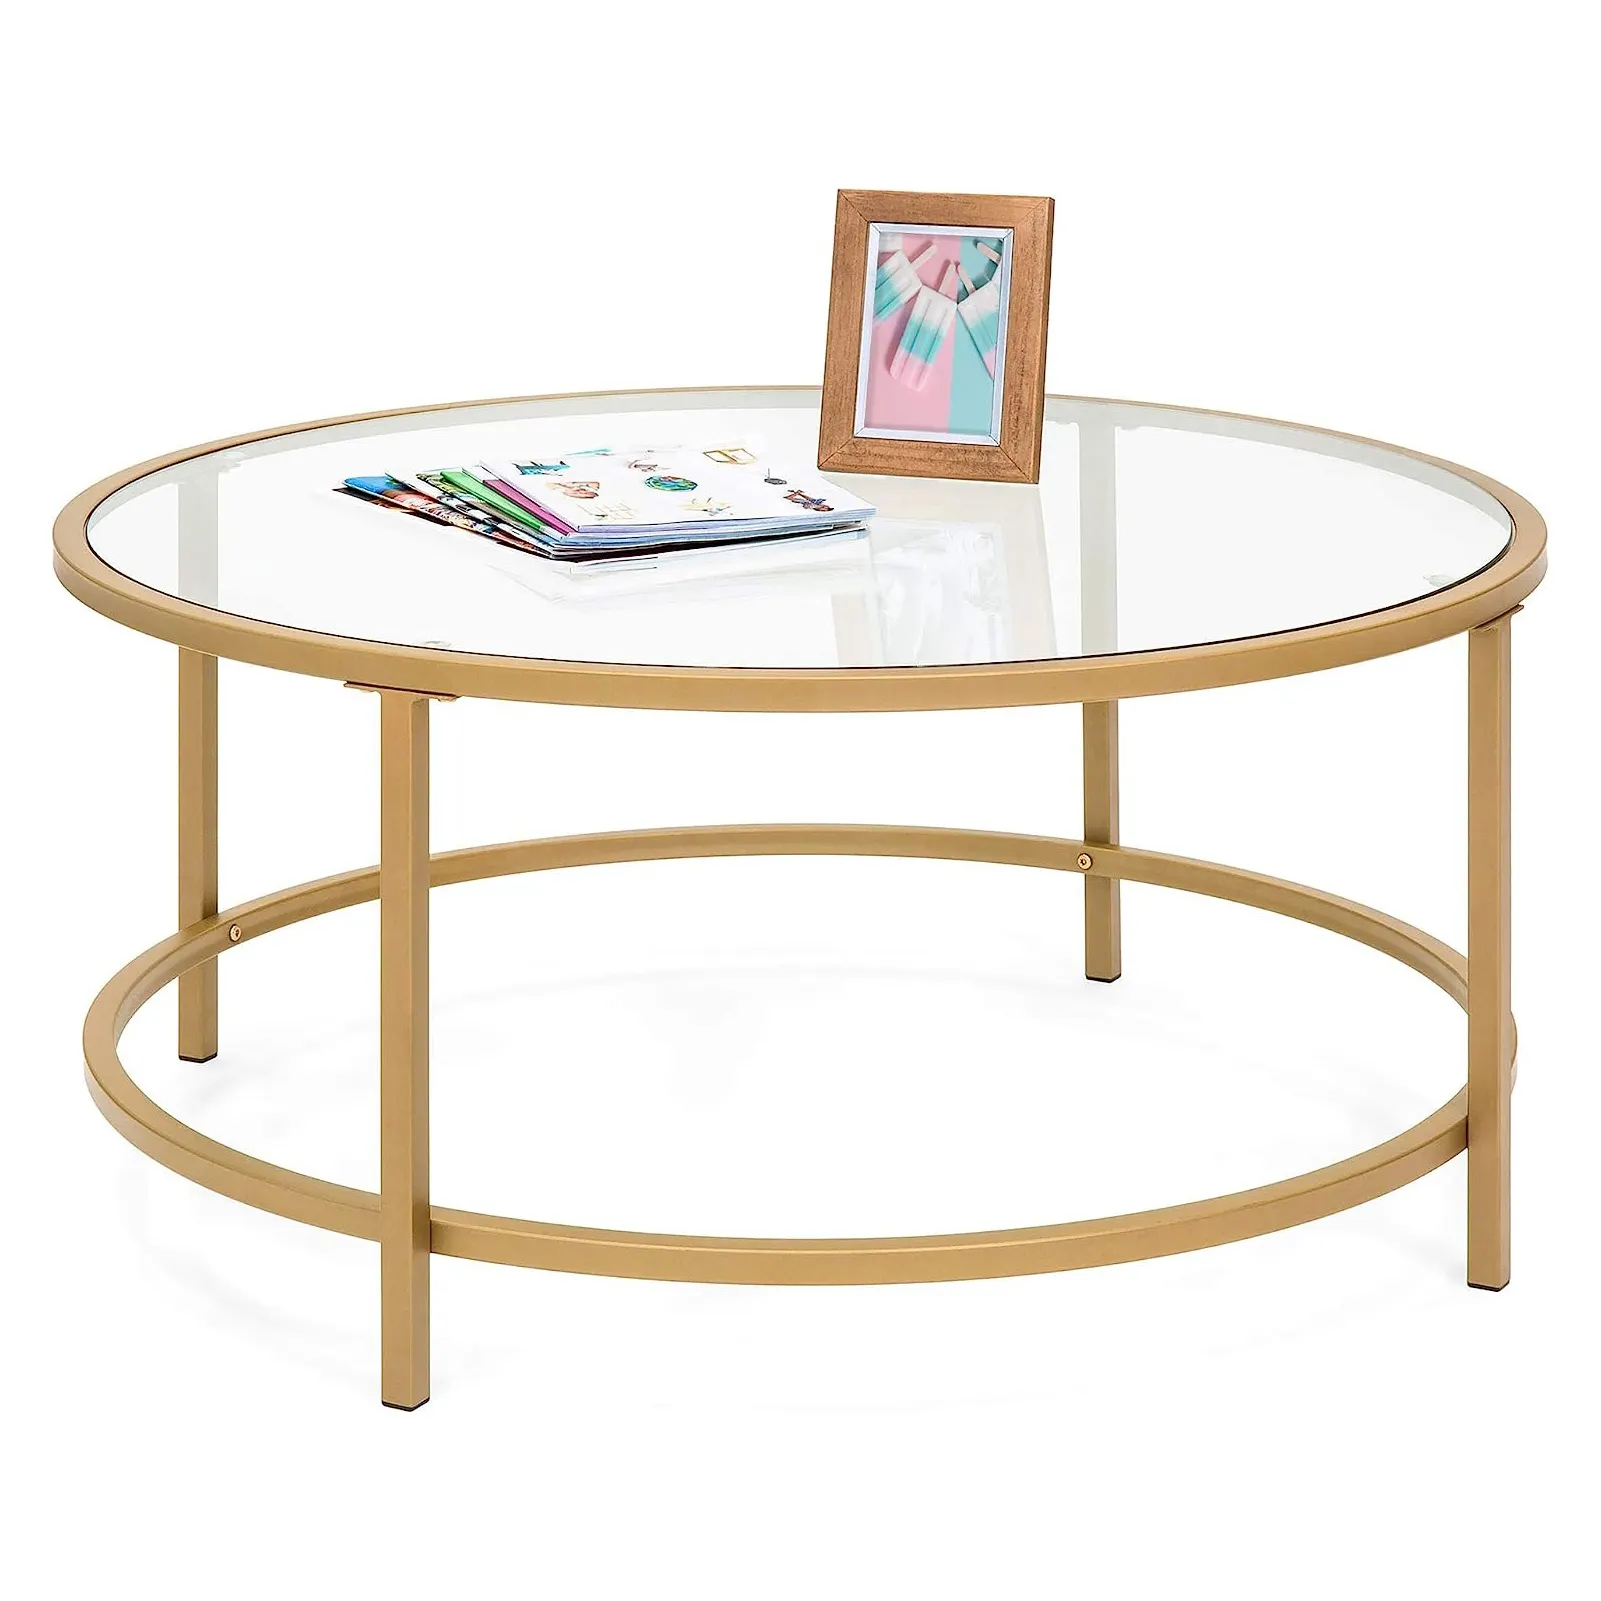 36in Modern Round Tempered Glass Accent Side Coffee Table for Living Room Dining Room Tea Home Decor w/Satin Trim Metal Frame